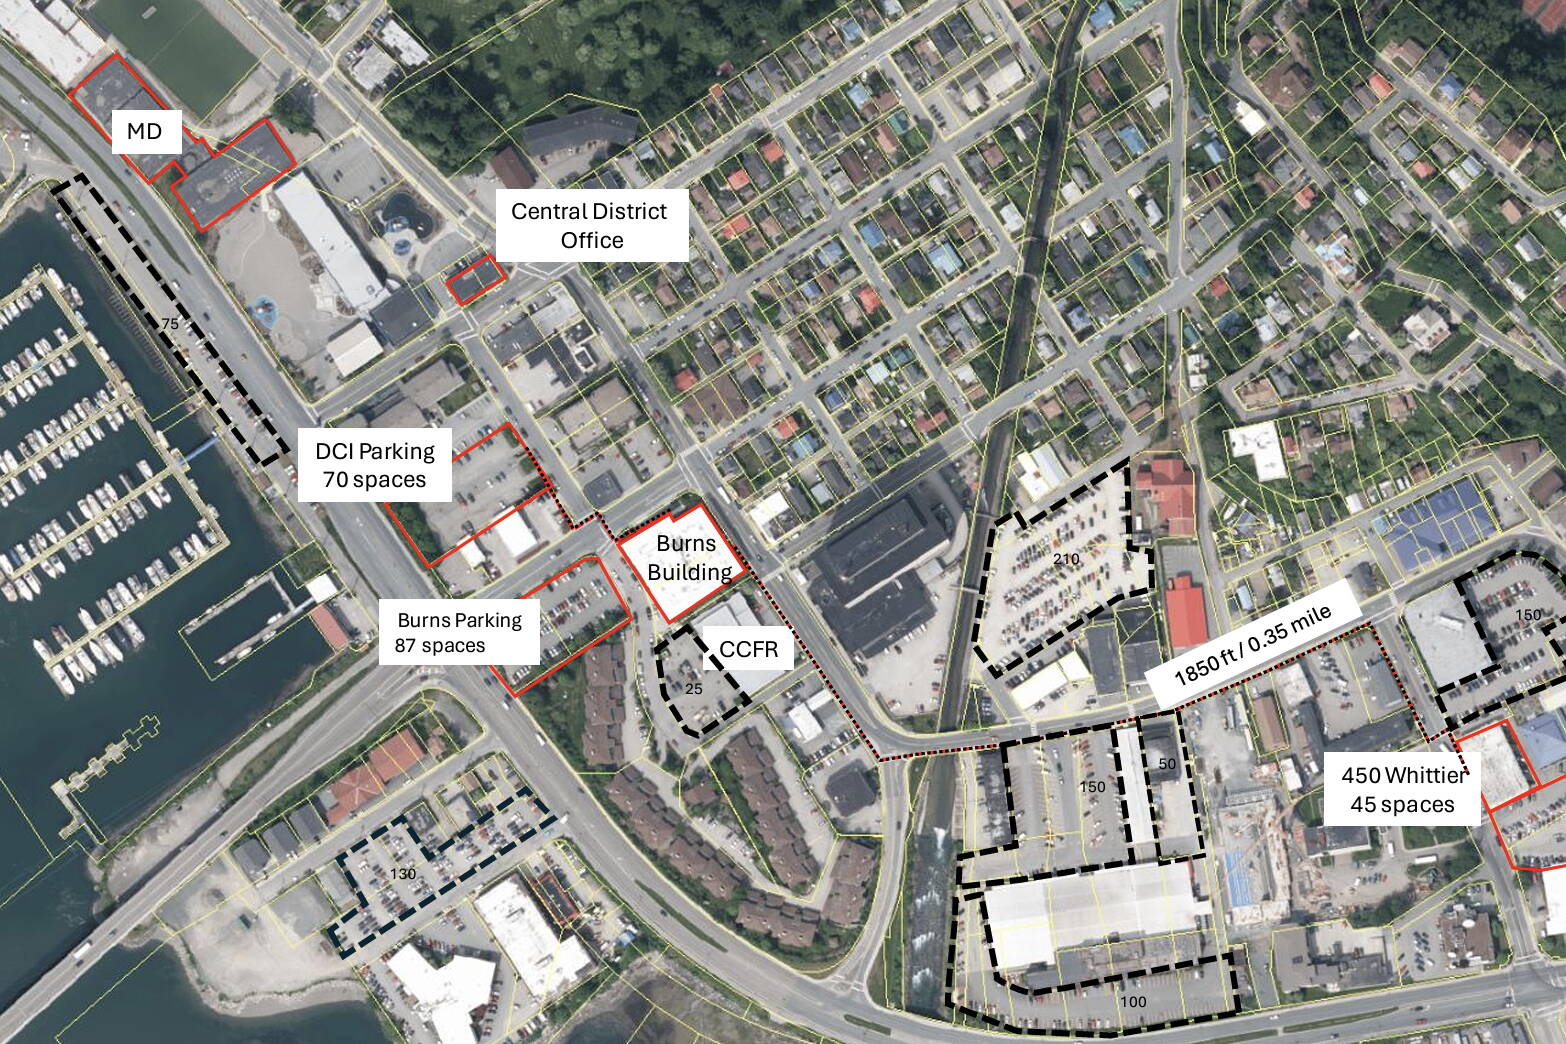 An overhead image shows possible locations to relocate offices for Juneau’s municipal employees along with some available parking lots. (City and Borough of Juneau image)